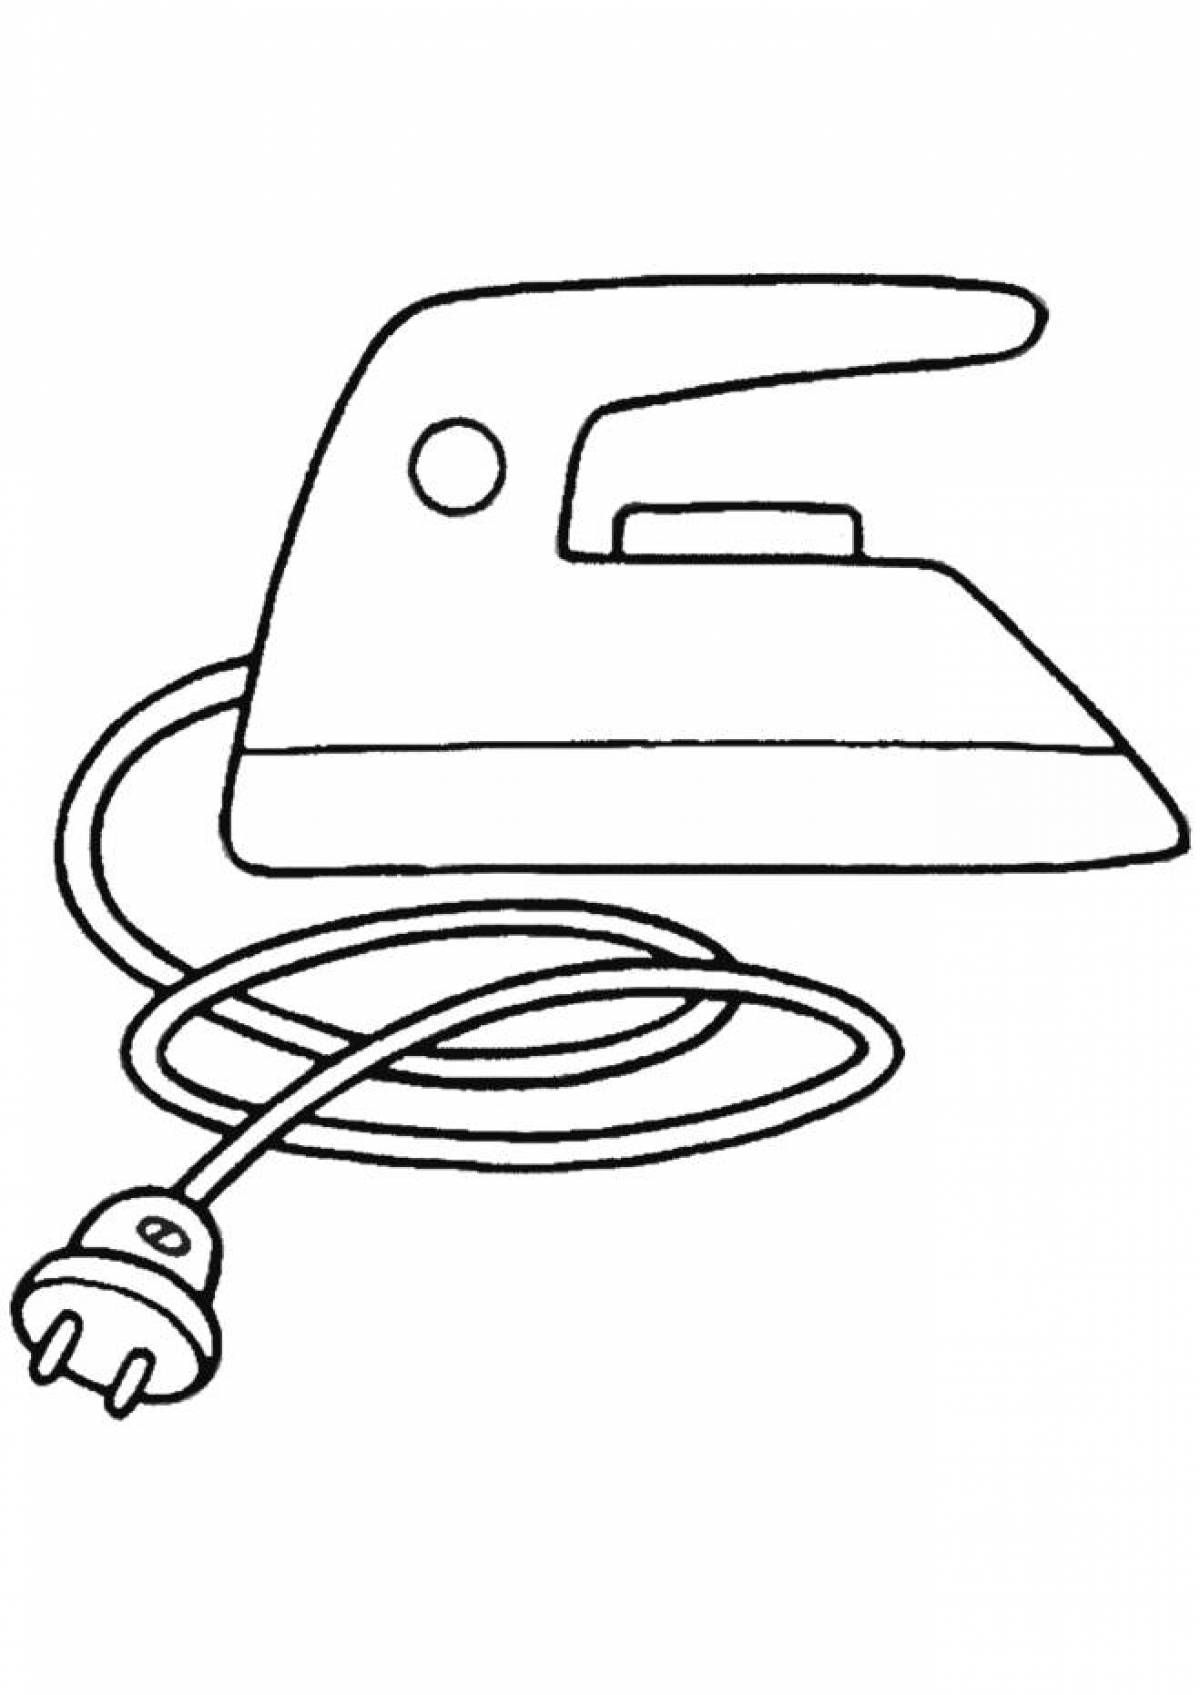 Fine electrical appliances coloring page